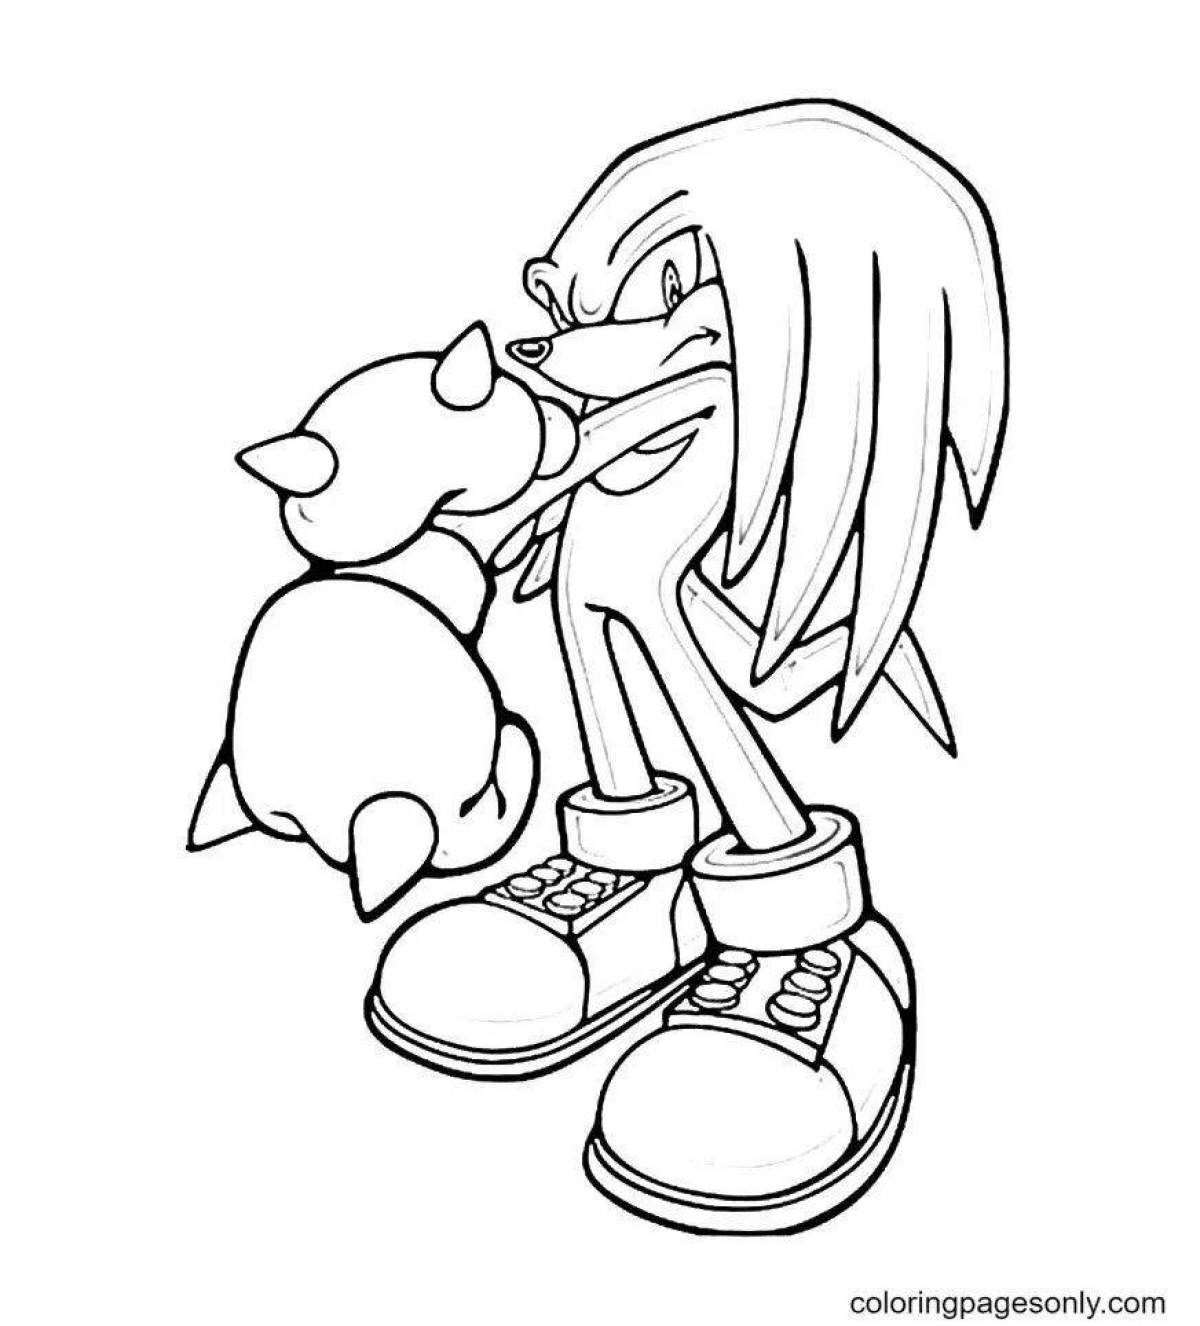 Playful knuckles coloring book